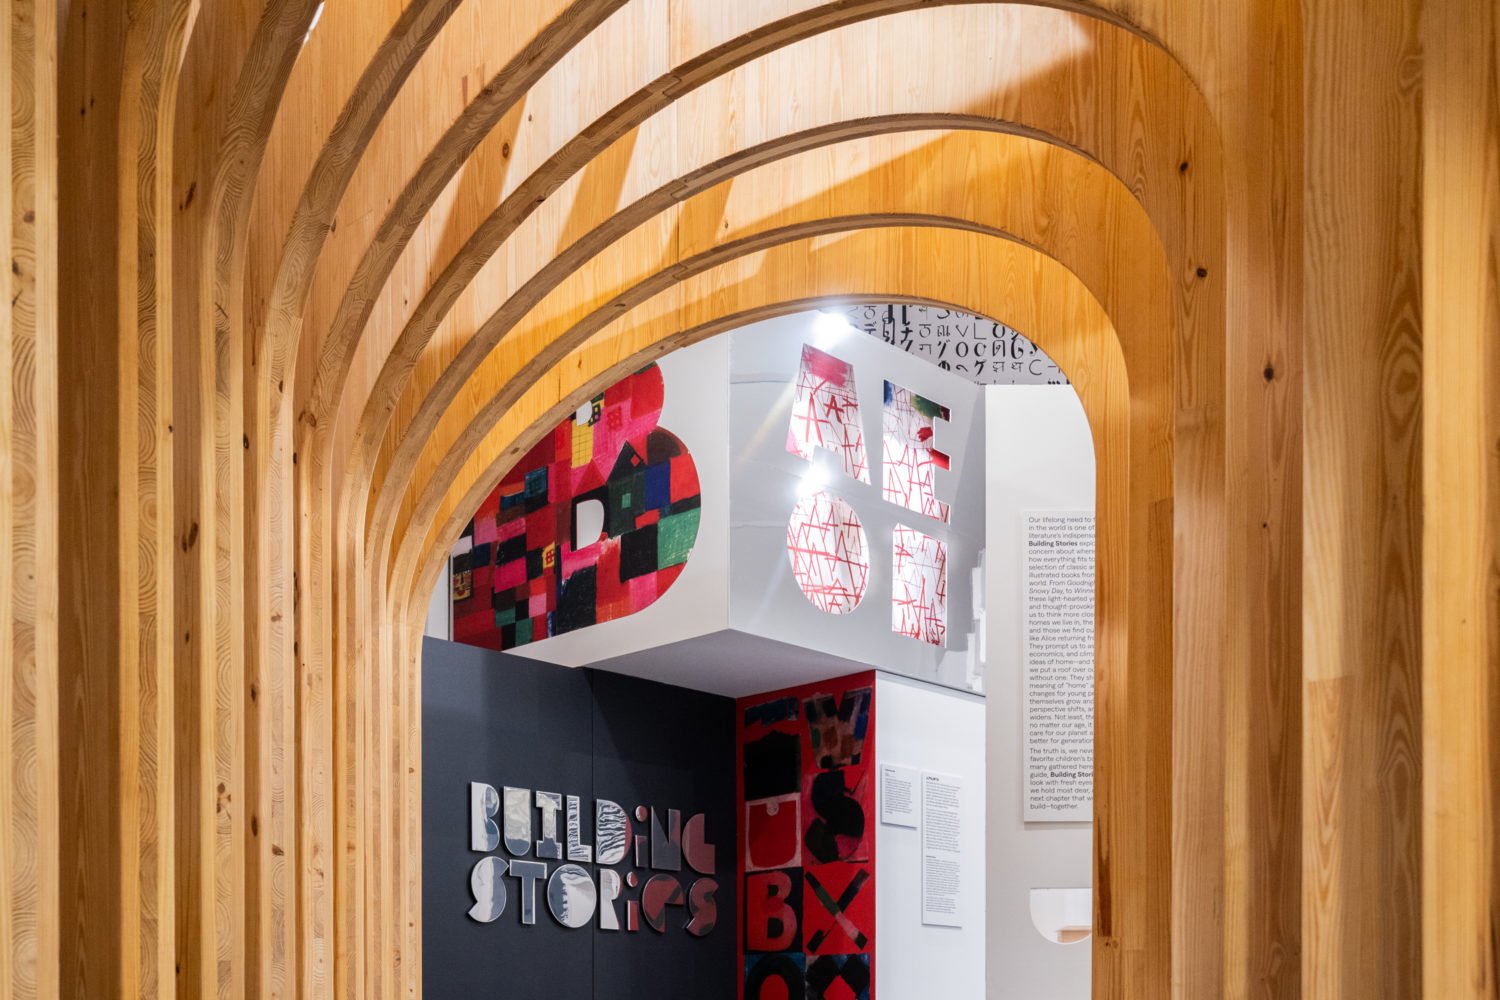 "Building Stories" is located on the ground floor of the National Building Museum. Photo by Elman Studio/NBA.